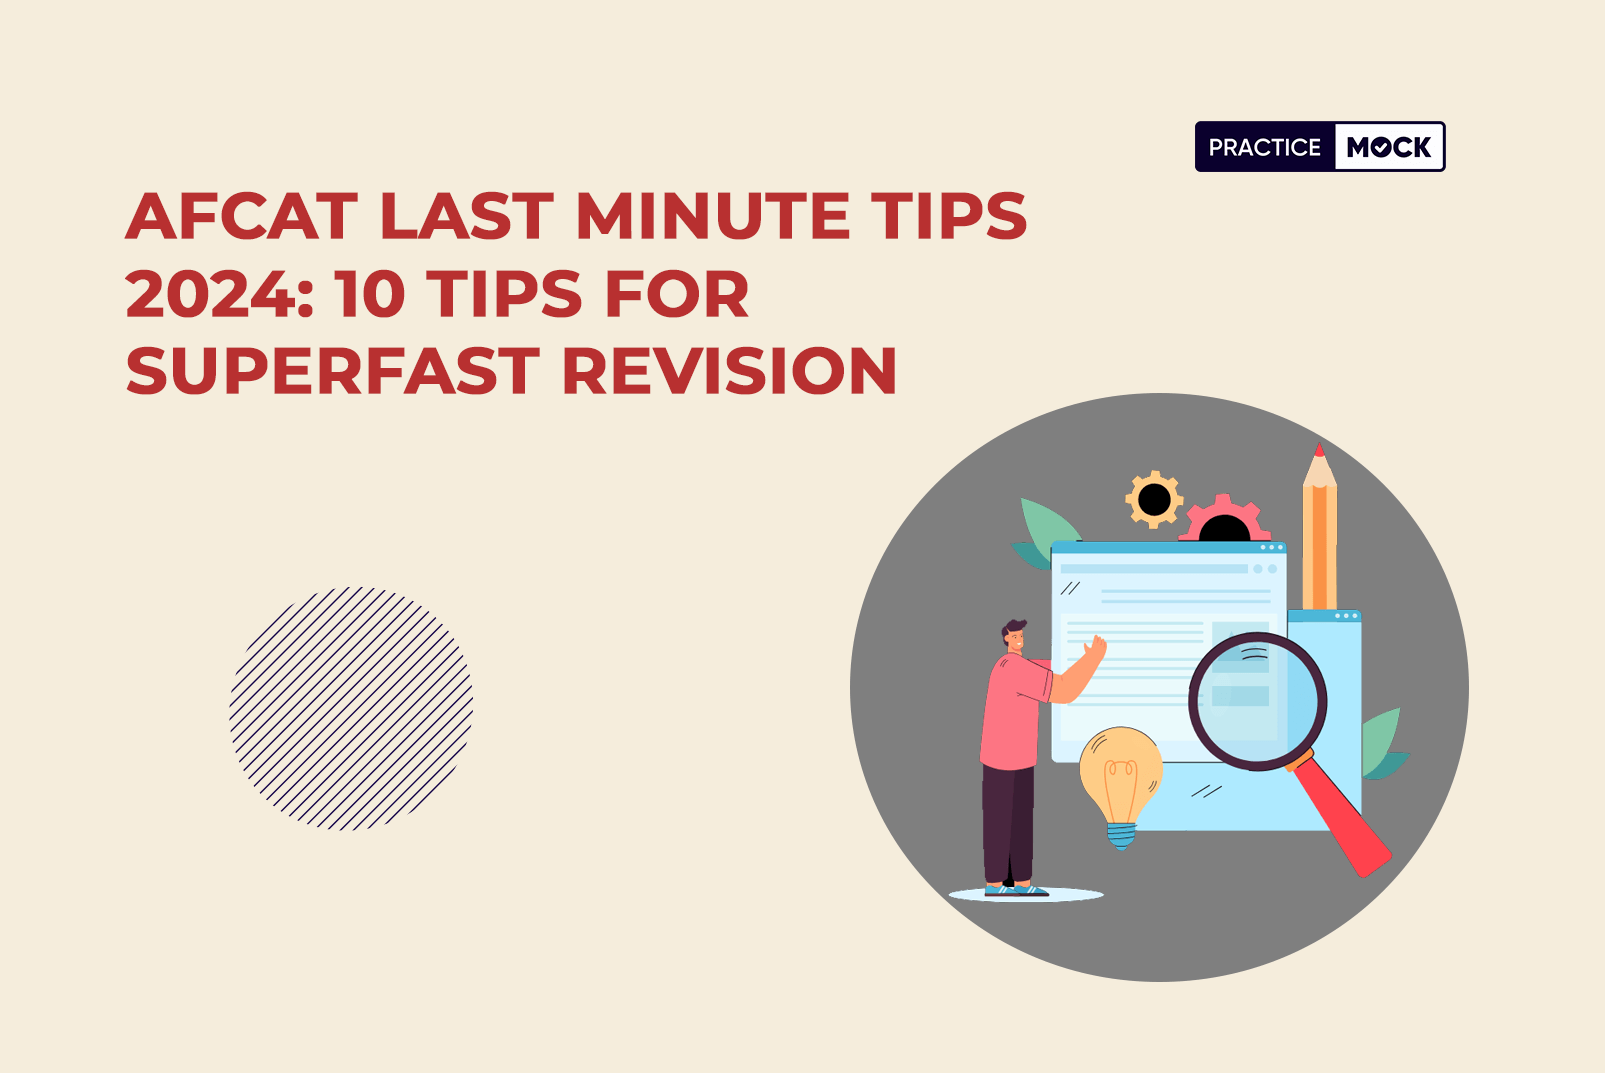 AFCAT Last Minute Tips 2024 10 Tips for Superfast Revision